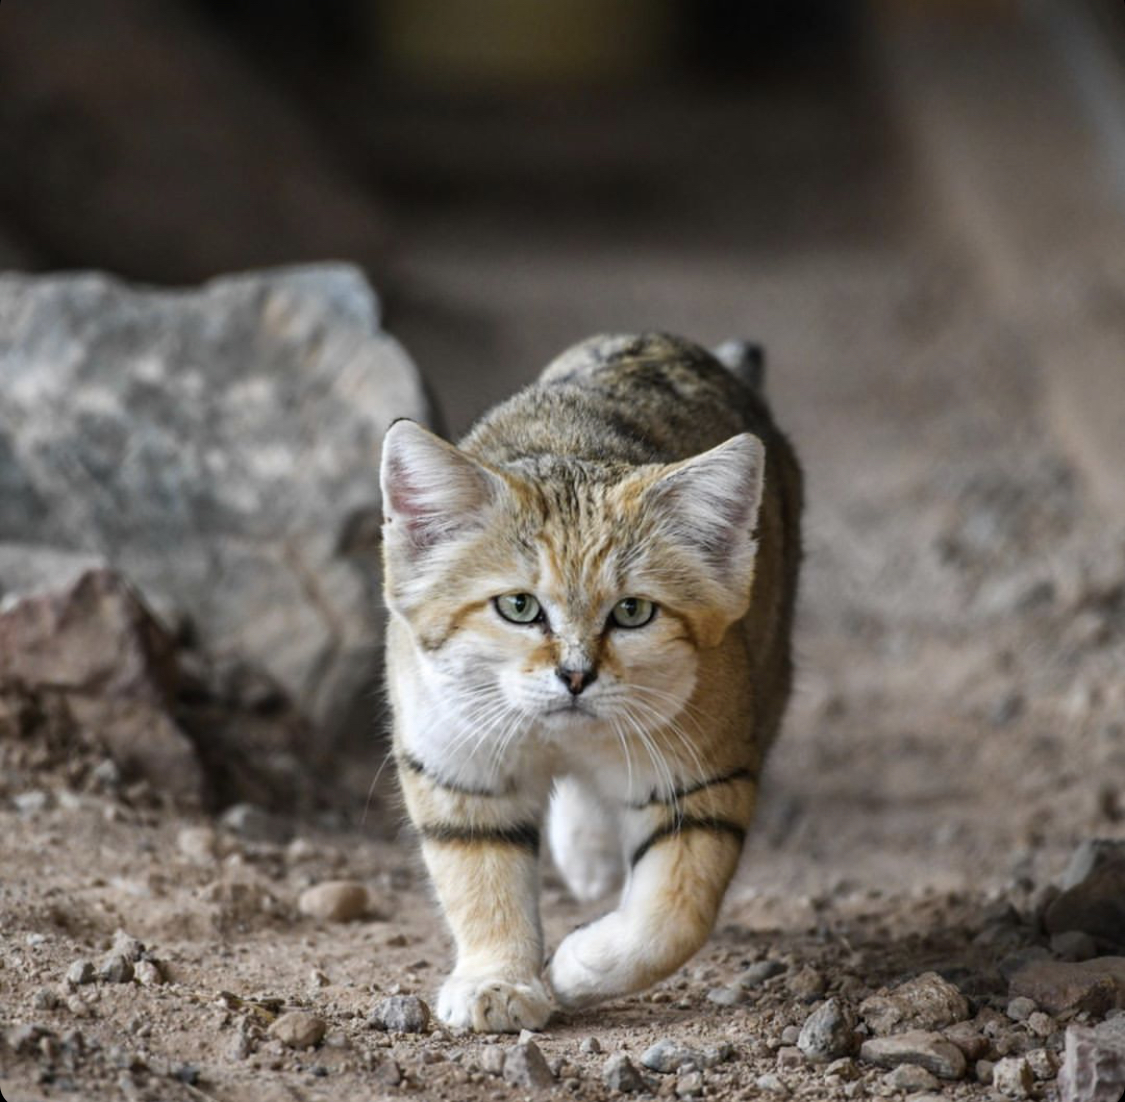 What Do Sand Cats Eat